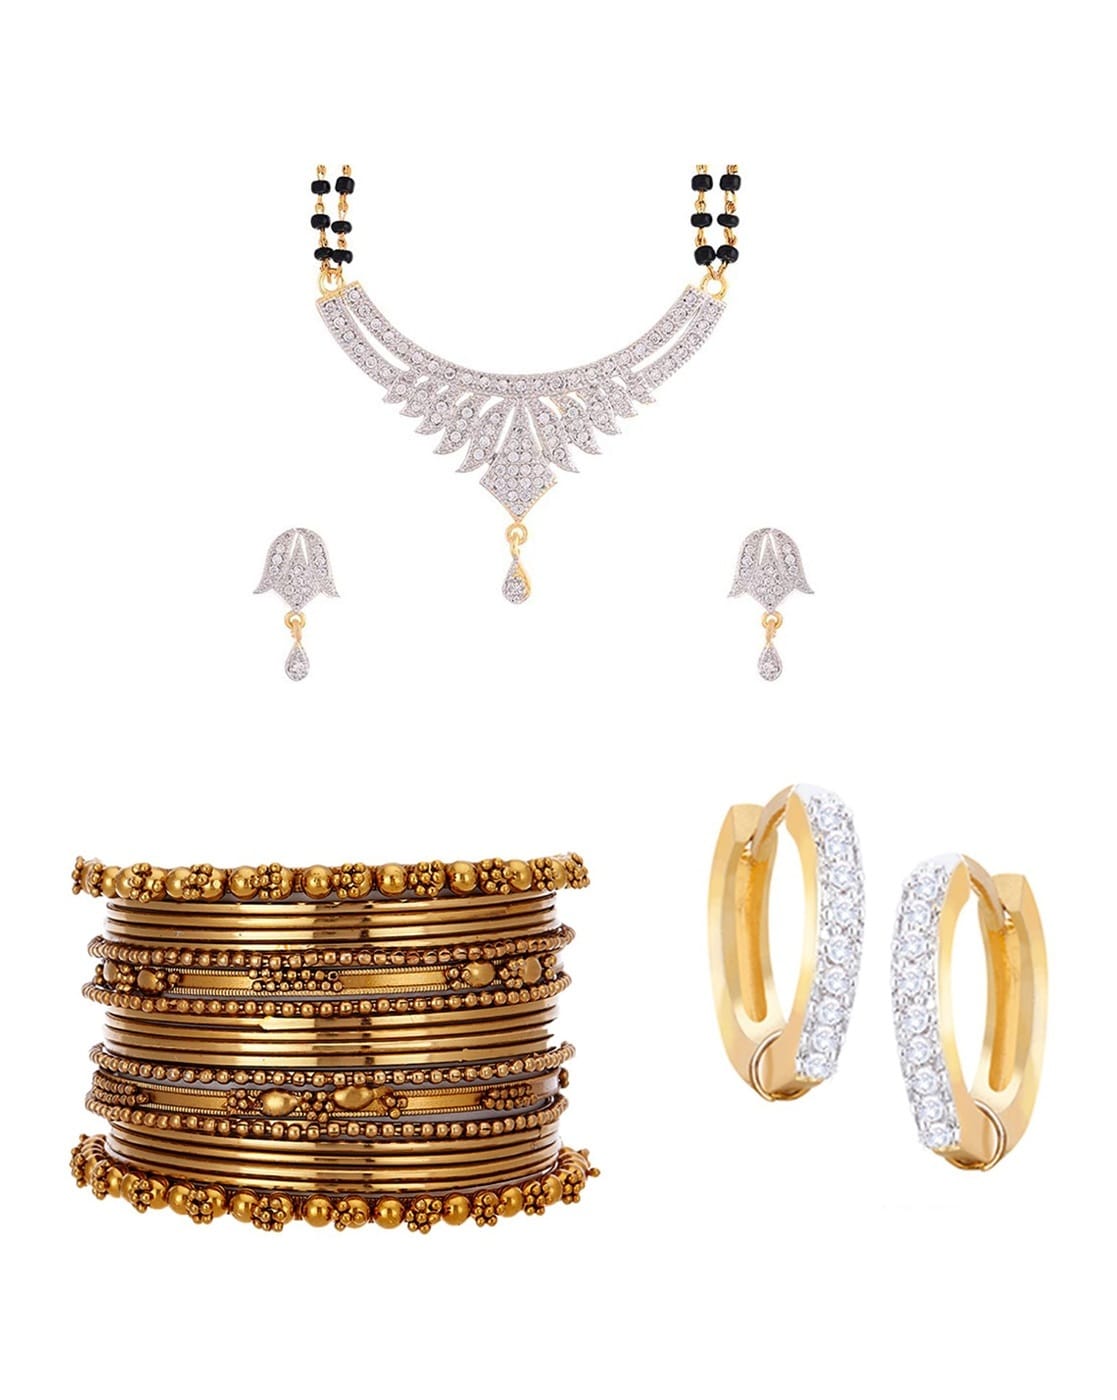 Zeneme Multi-Piece Necklace & Bangles Set For Women (Gold-Plated, OS)